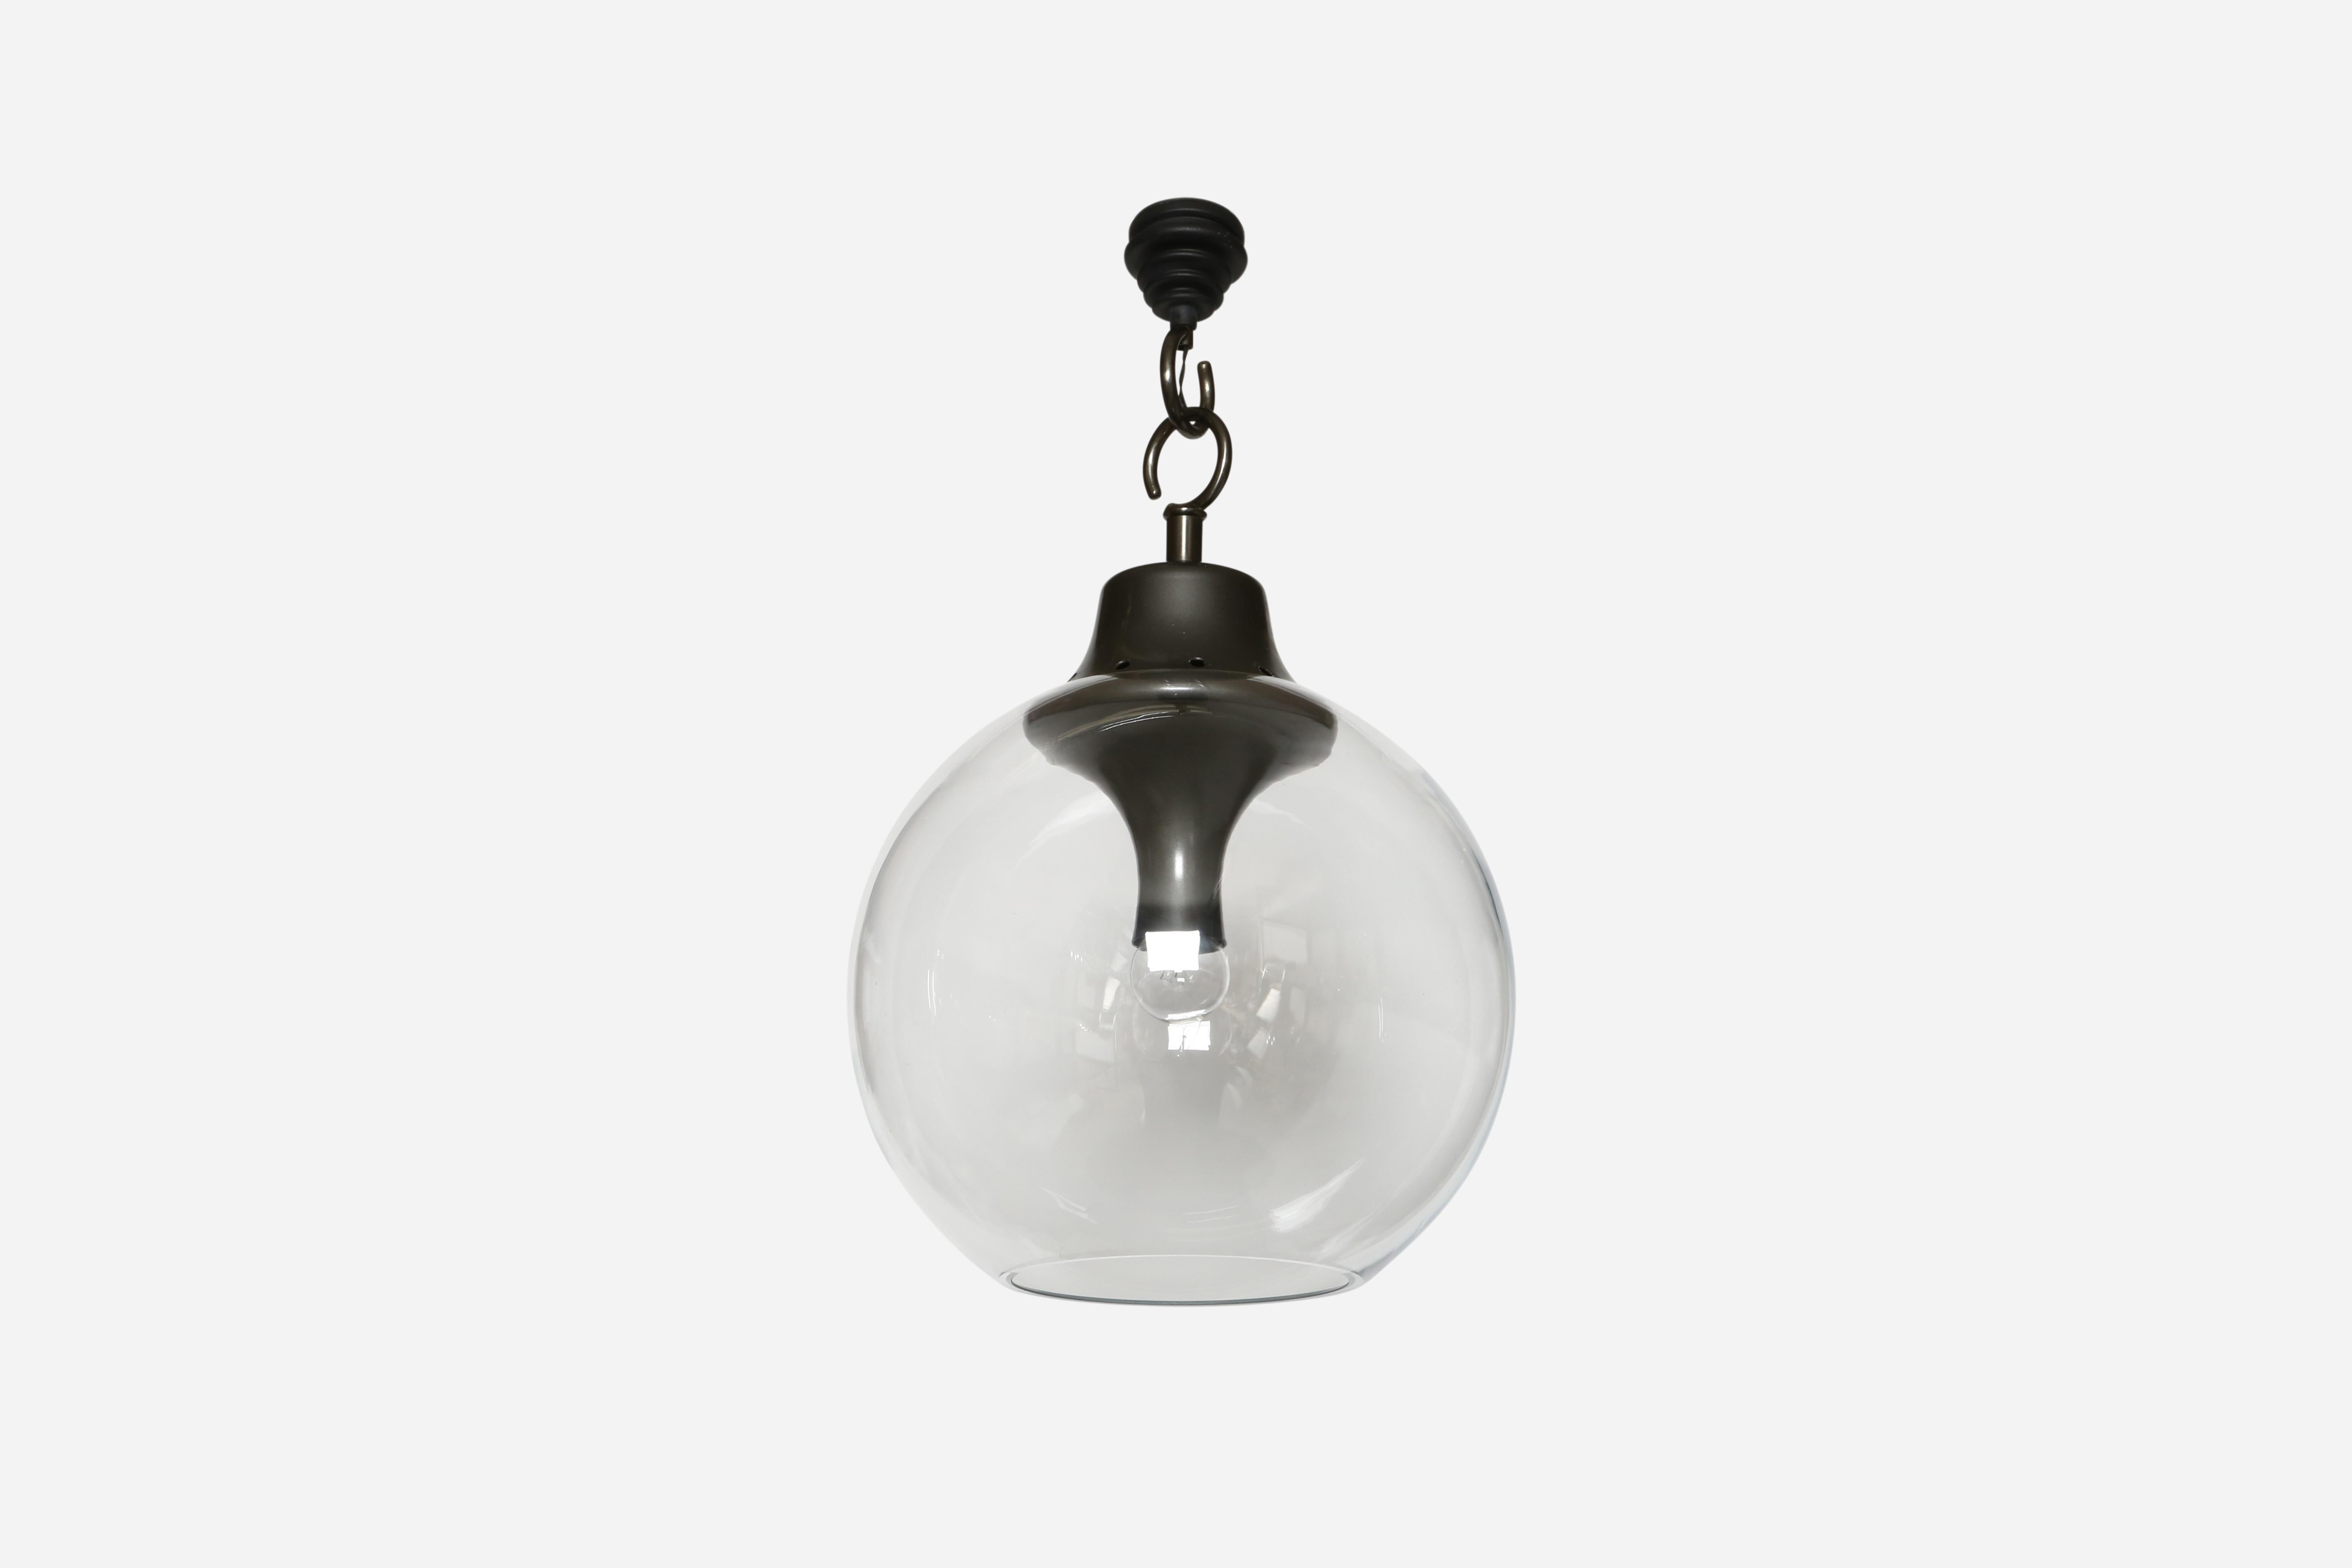 Luigi Caccia Dominioni for Azucena ceiling suspension lights.
Model LS10 Boccia. Designed and manufactured in Italy in 1960s.
Murano glass, patinated aluminum glass holder, brass.
Rubber ceiling canopy.
Complimentary US rewiring with custom ceiling